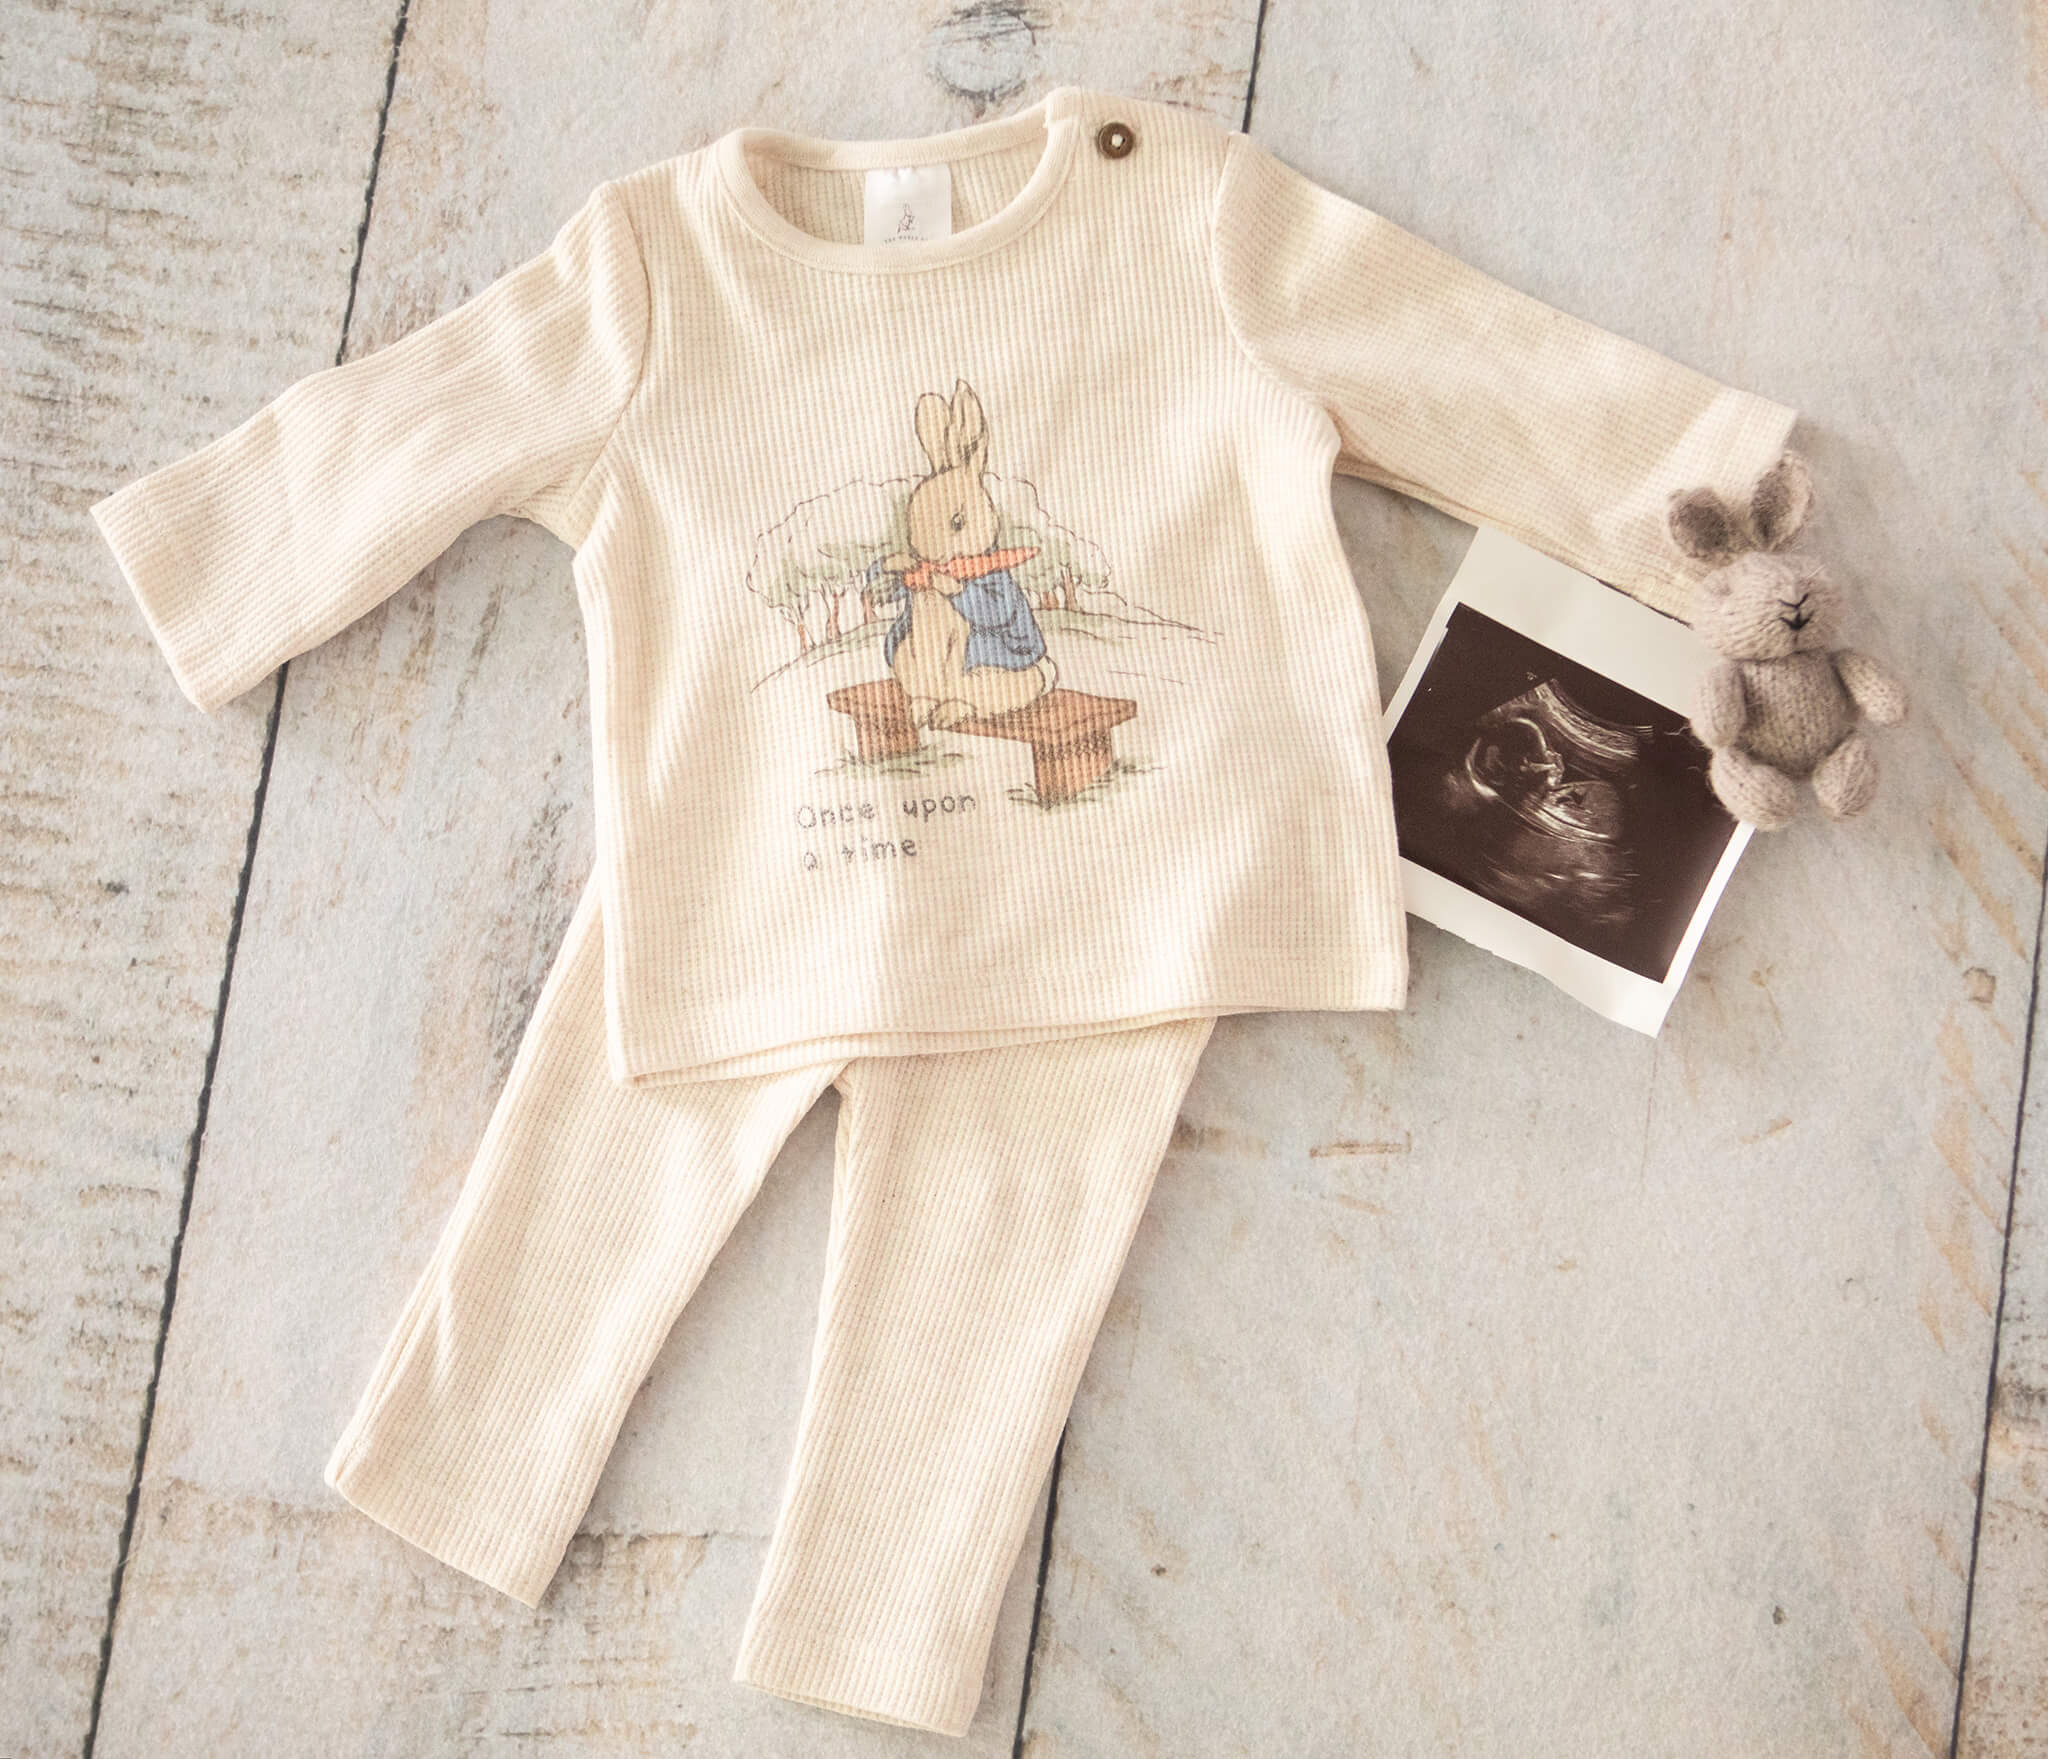 Peter Rabbit outfit for a newborn baby boy pictured side by side with the scan and a little rabbit teddy bear photographed by Los Angeles photographer Elsie Rose Photography - having a second baby